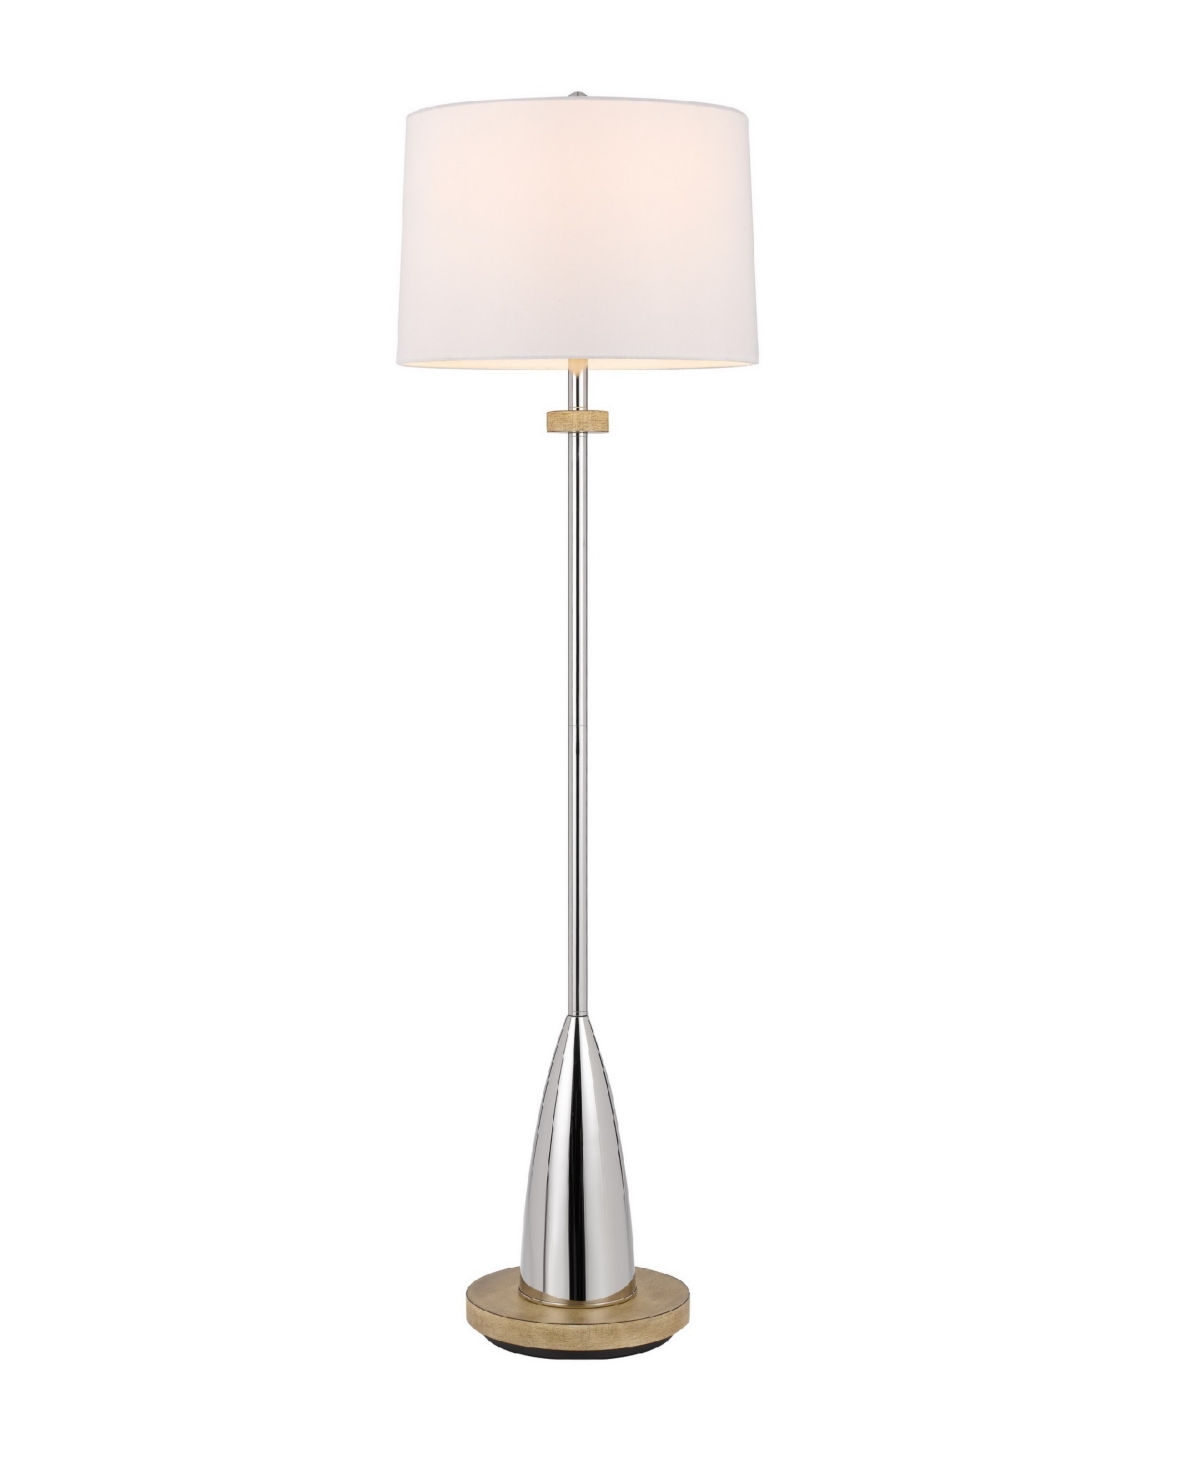 Shop Cal Lighting 61" Height Metal Floor Lamp With Wood Accents In Chrome,wood